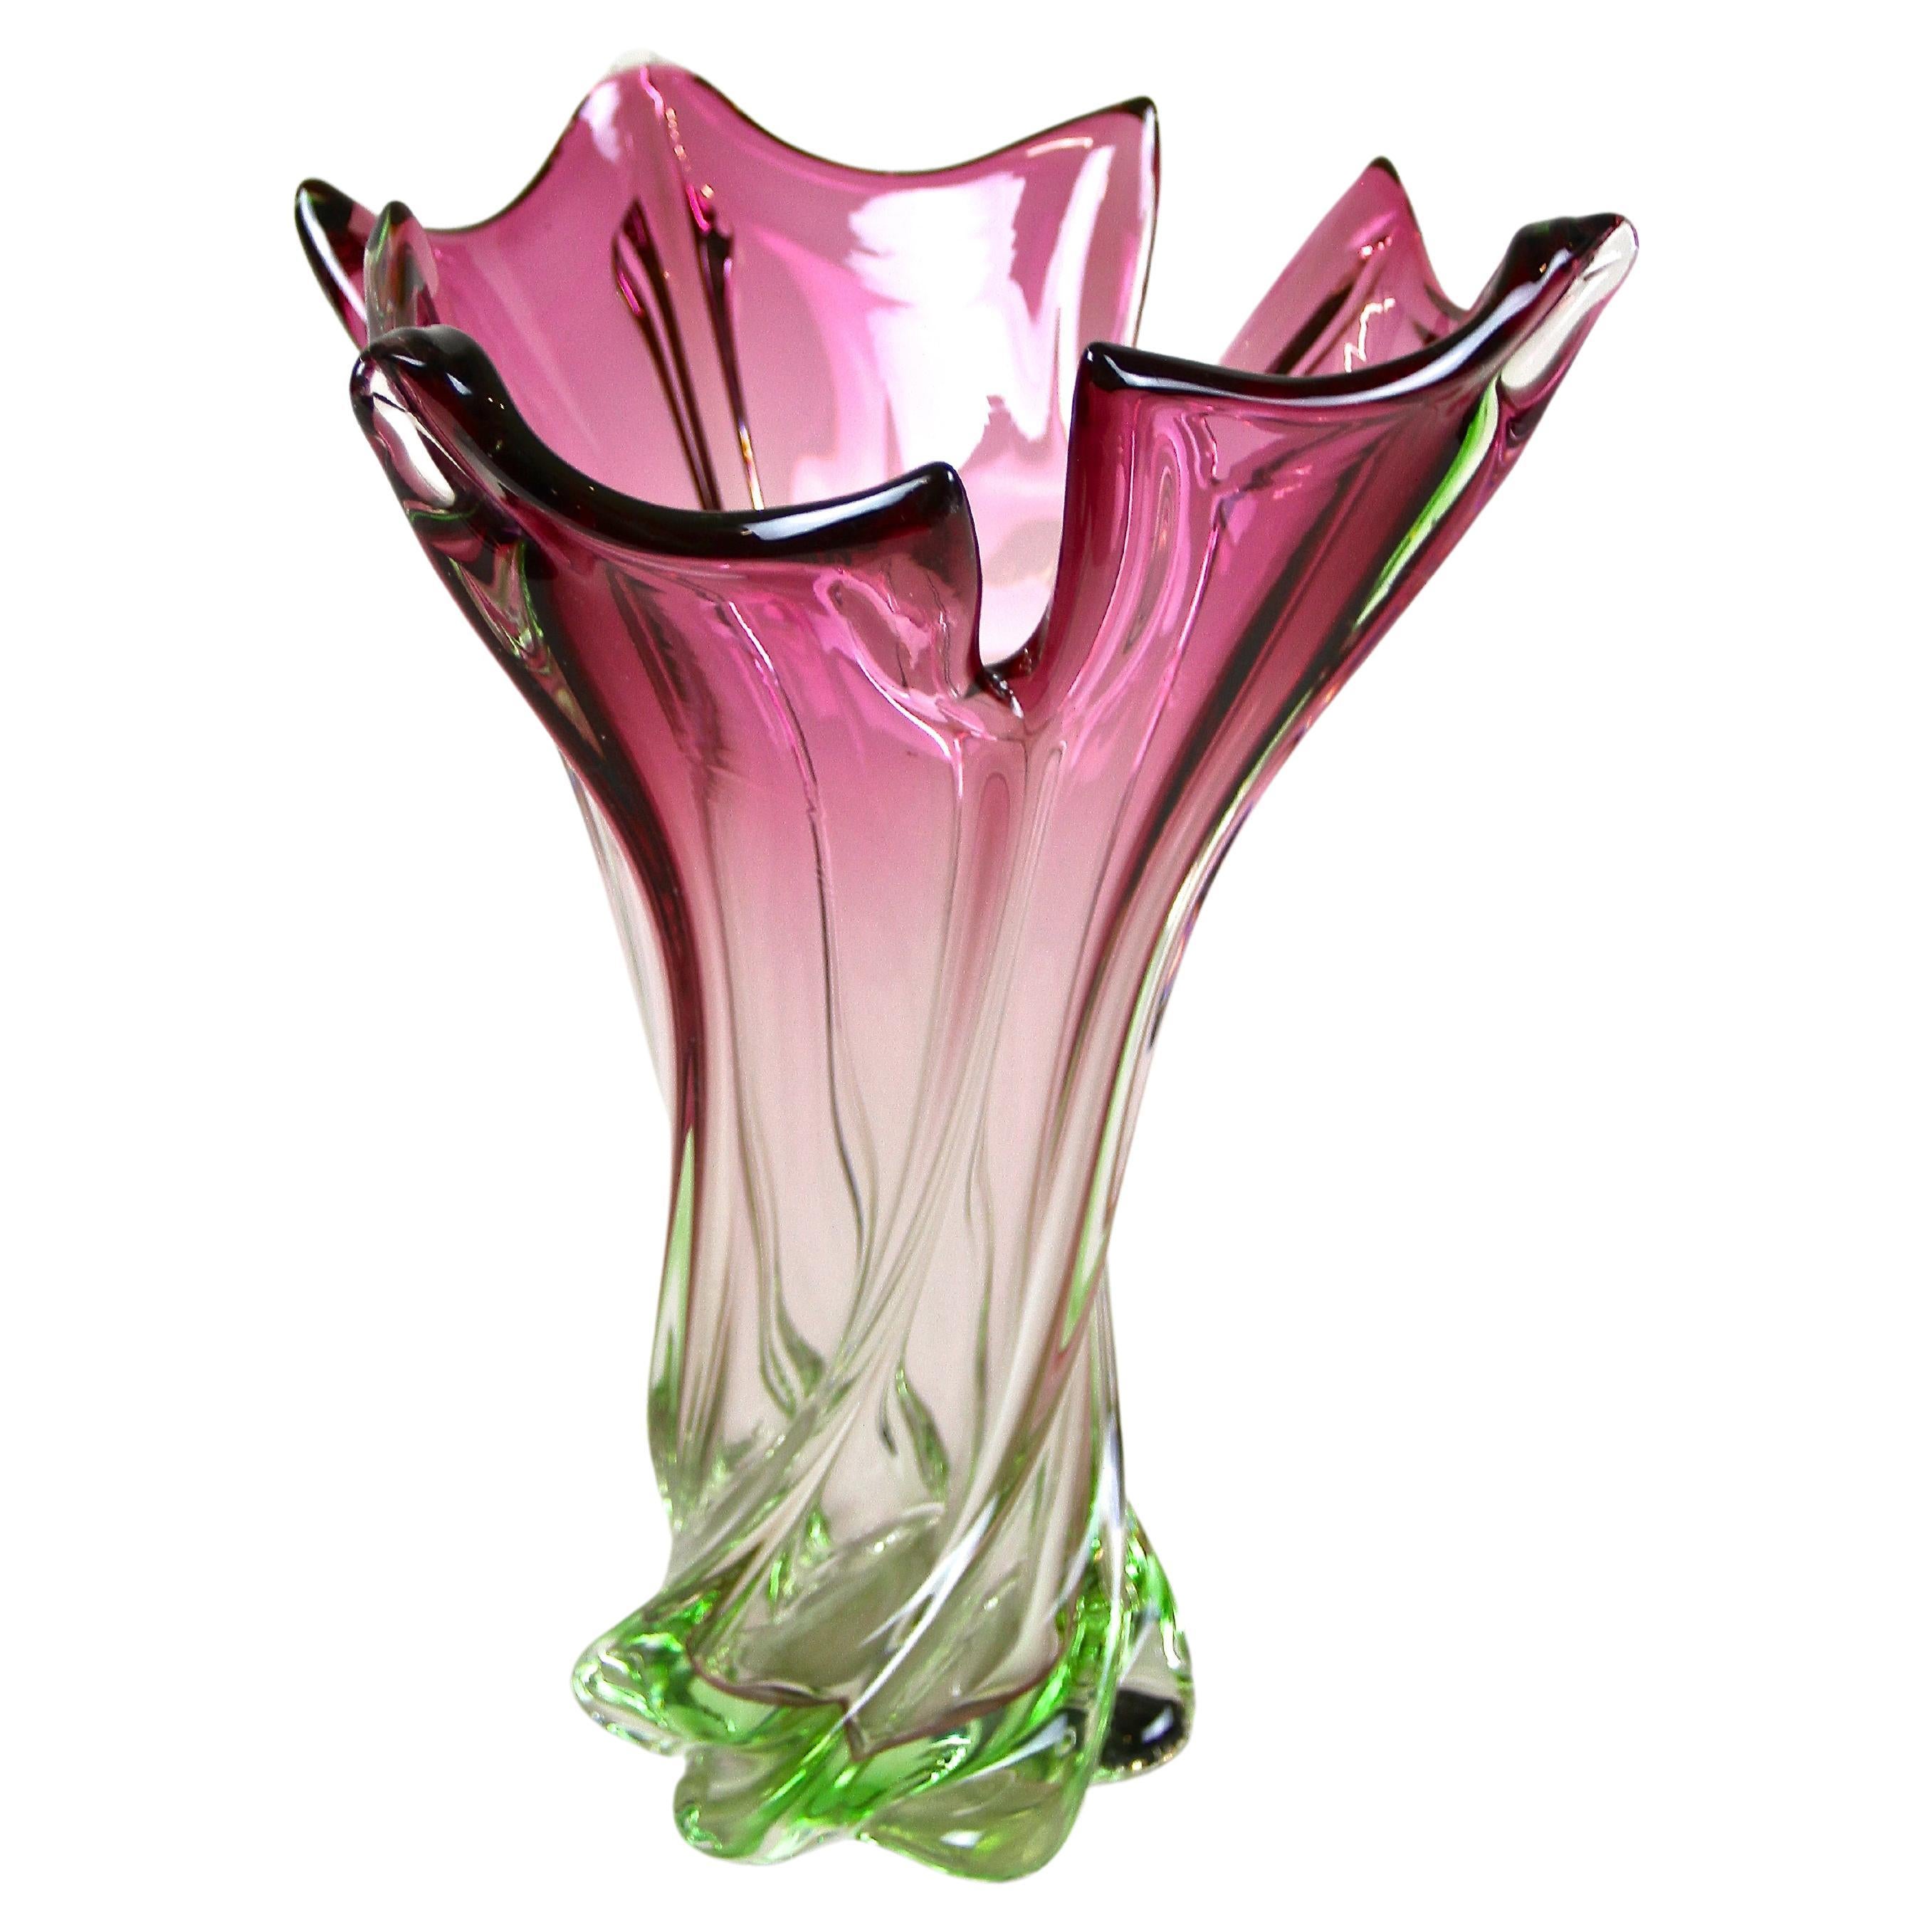 pink glass vase with clear handles r trademark symbol